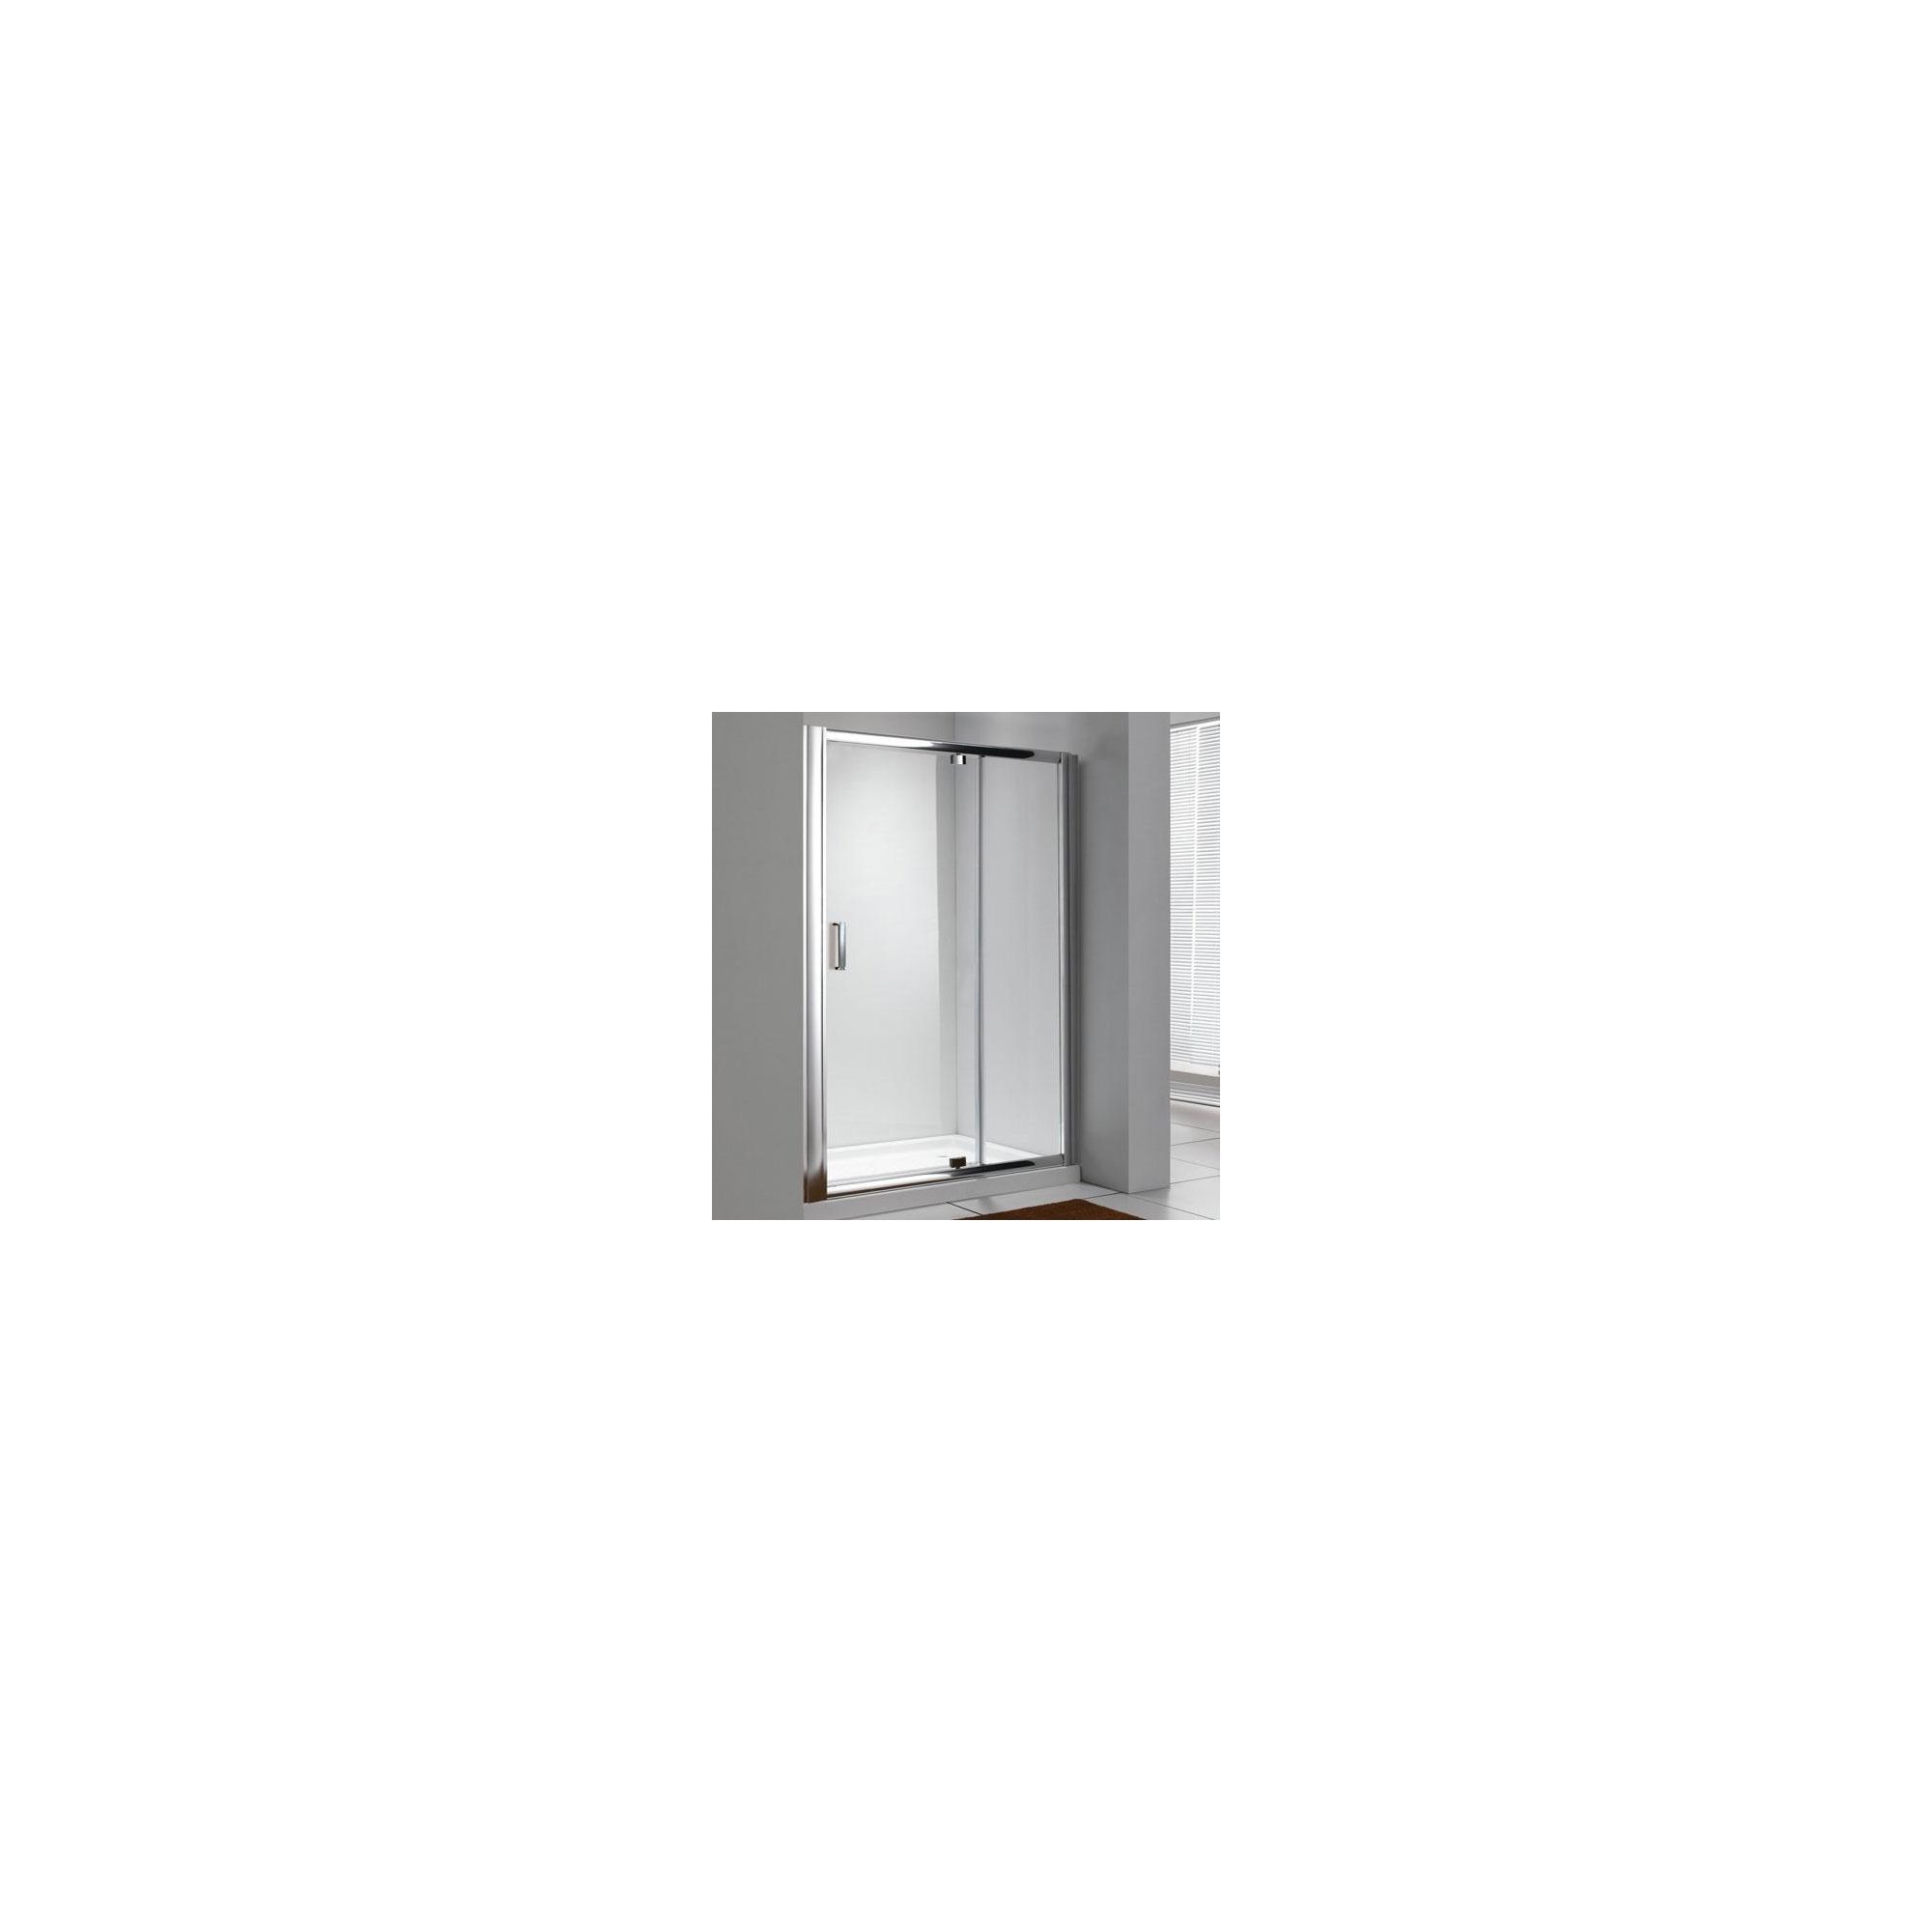 Duchy Style Pivot Door Shower Enclosure, 760mm x 760mm, 6mm Glass, Low Profile Tray at Tescos Direct